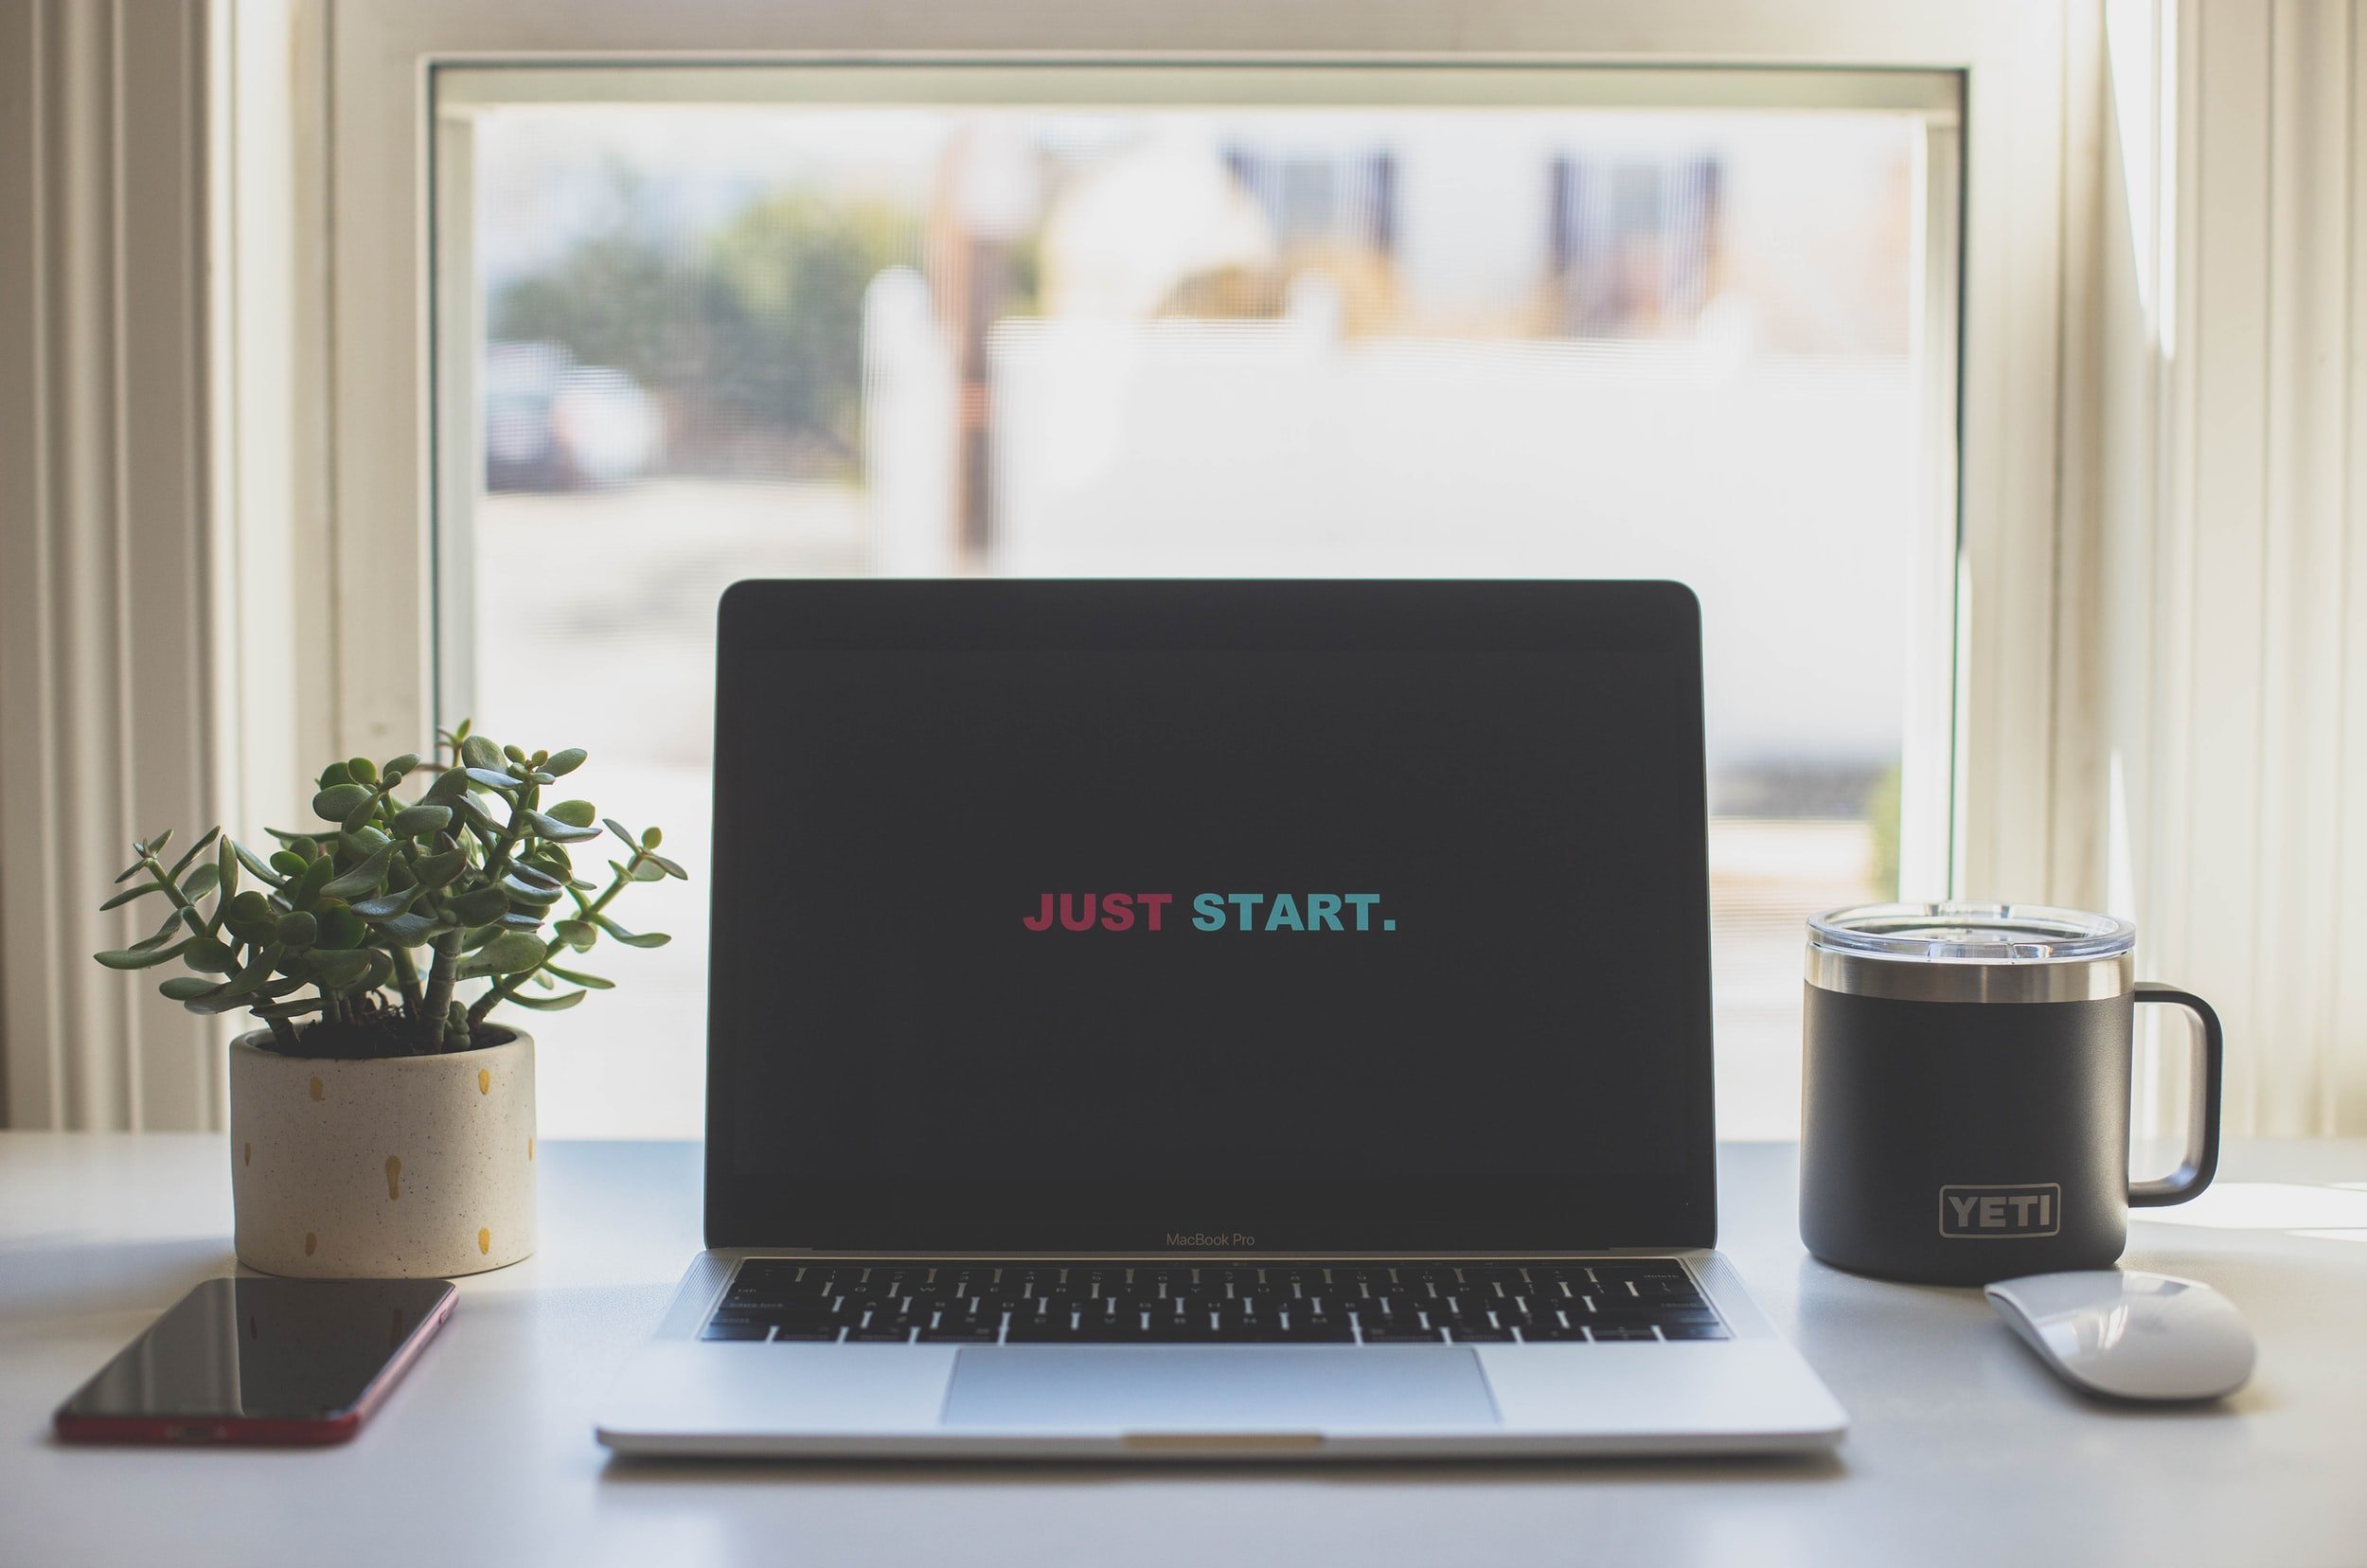 An Apple laptop in front of a window with a Yeti mug, an iPhone, and a magic mouse with the words "Just Start" on the screen 